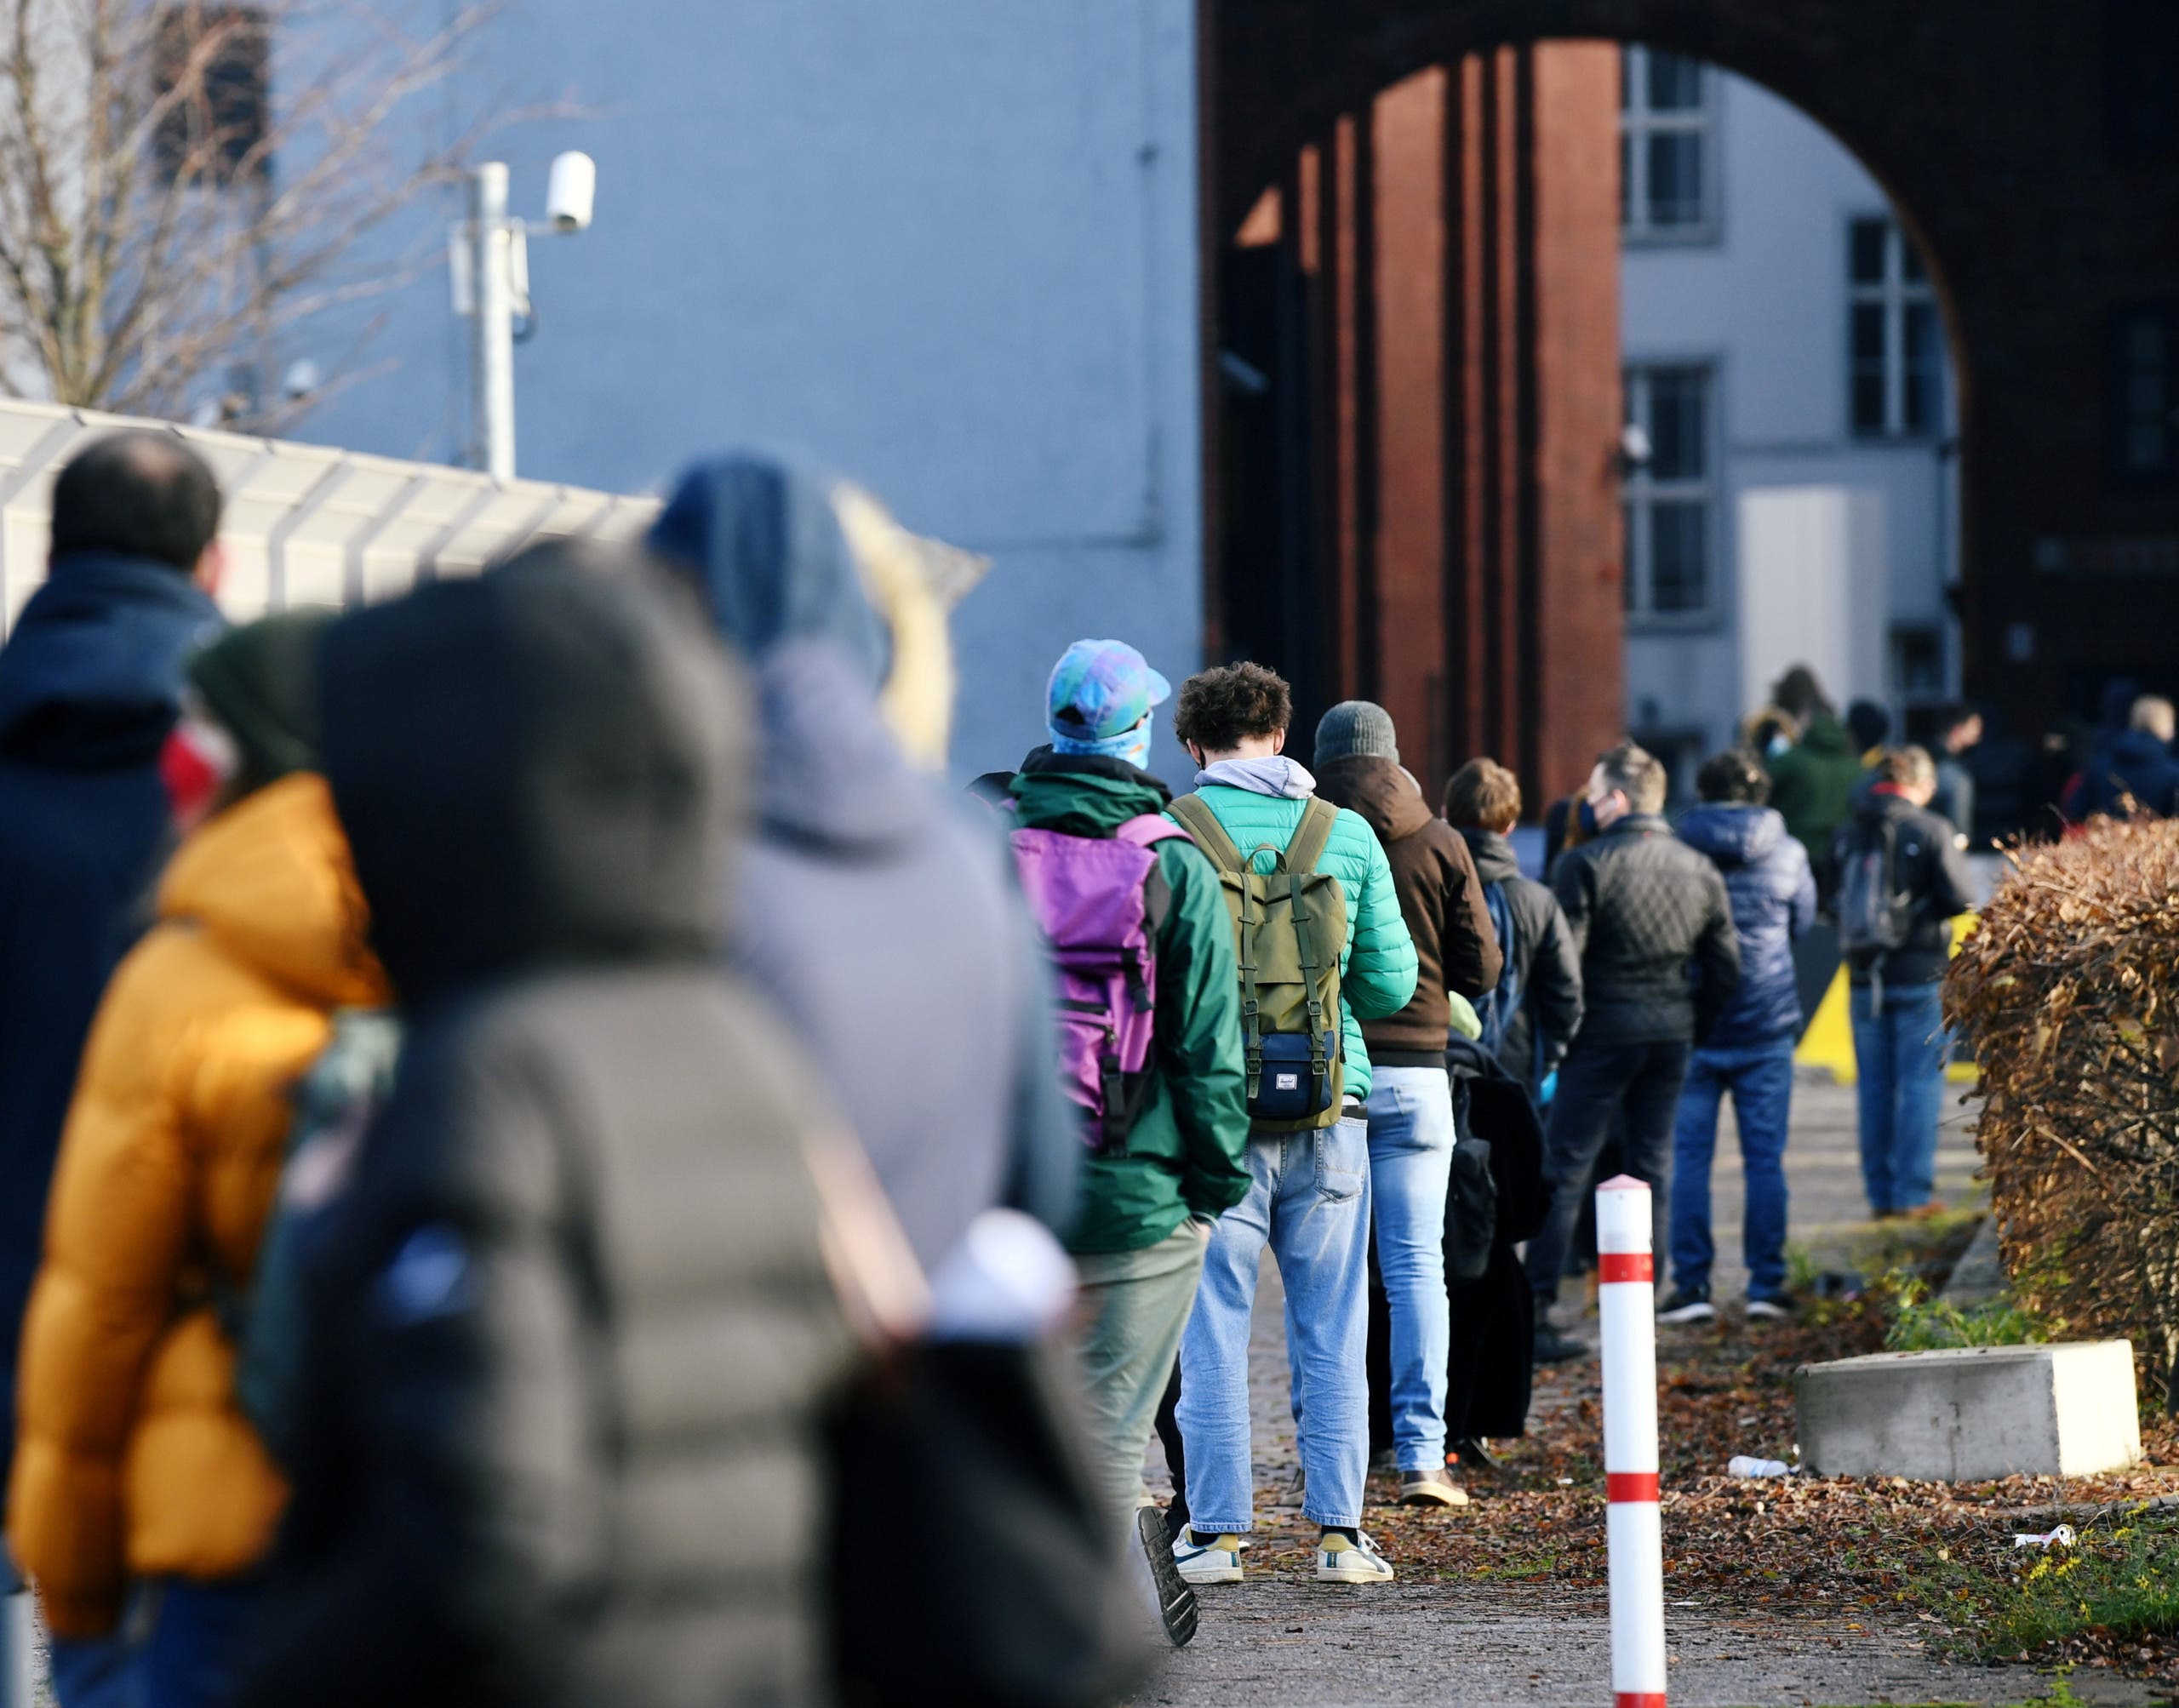 People queue at a walk-in COVID-19 testing centre at Wilhelmstrasse, amid the coronavirus disease (COVID-19) pandemic, in Berlin, Germany. (File photo: Reuters)